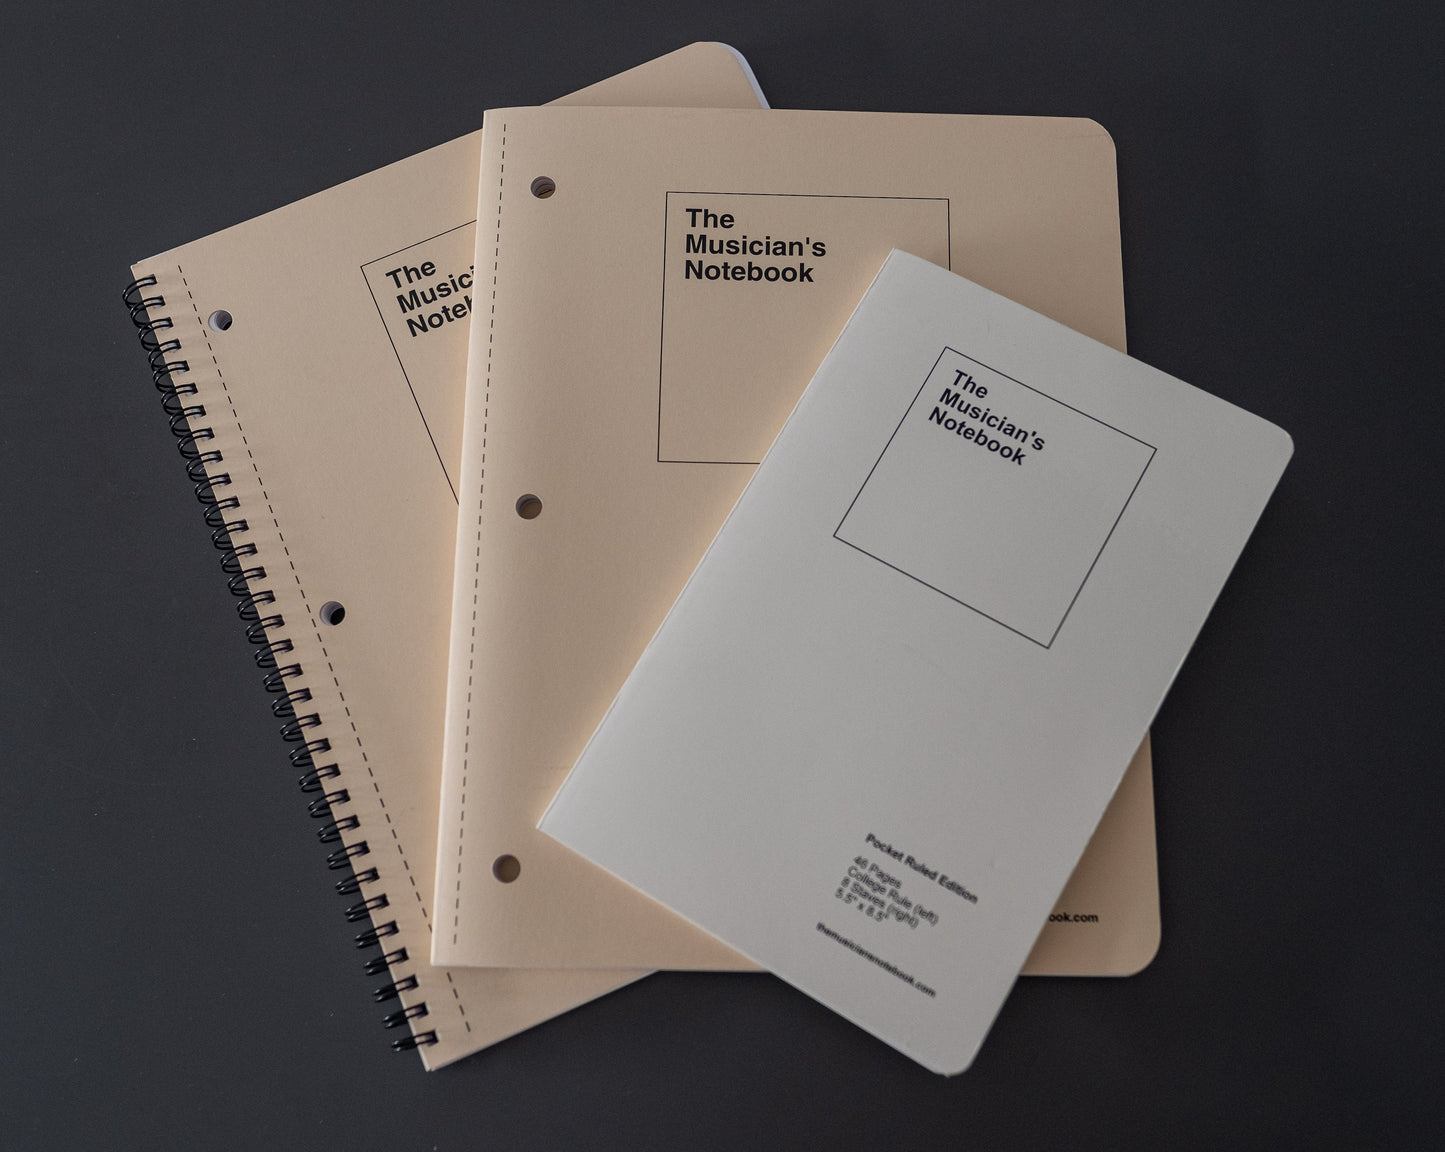 Musician's notebook semester pack, Ruled, Slim Ruled, and Pocket Ruled editions